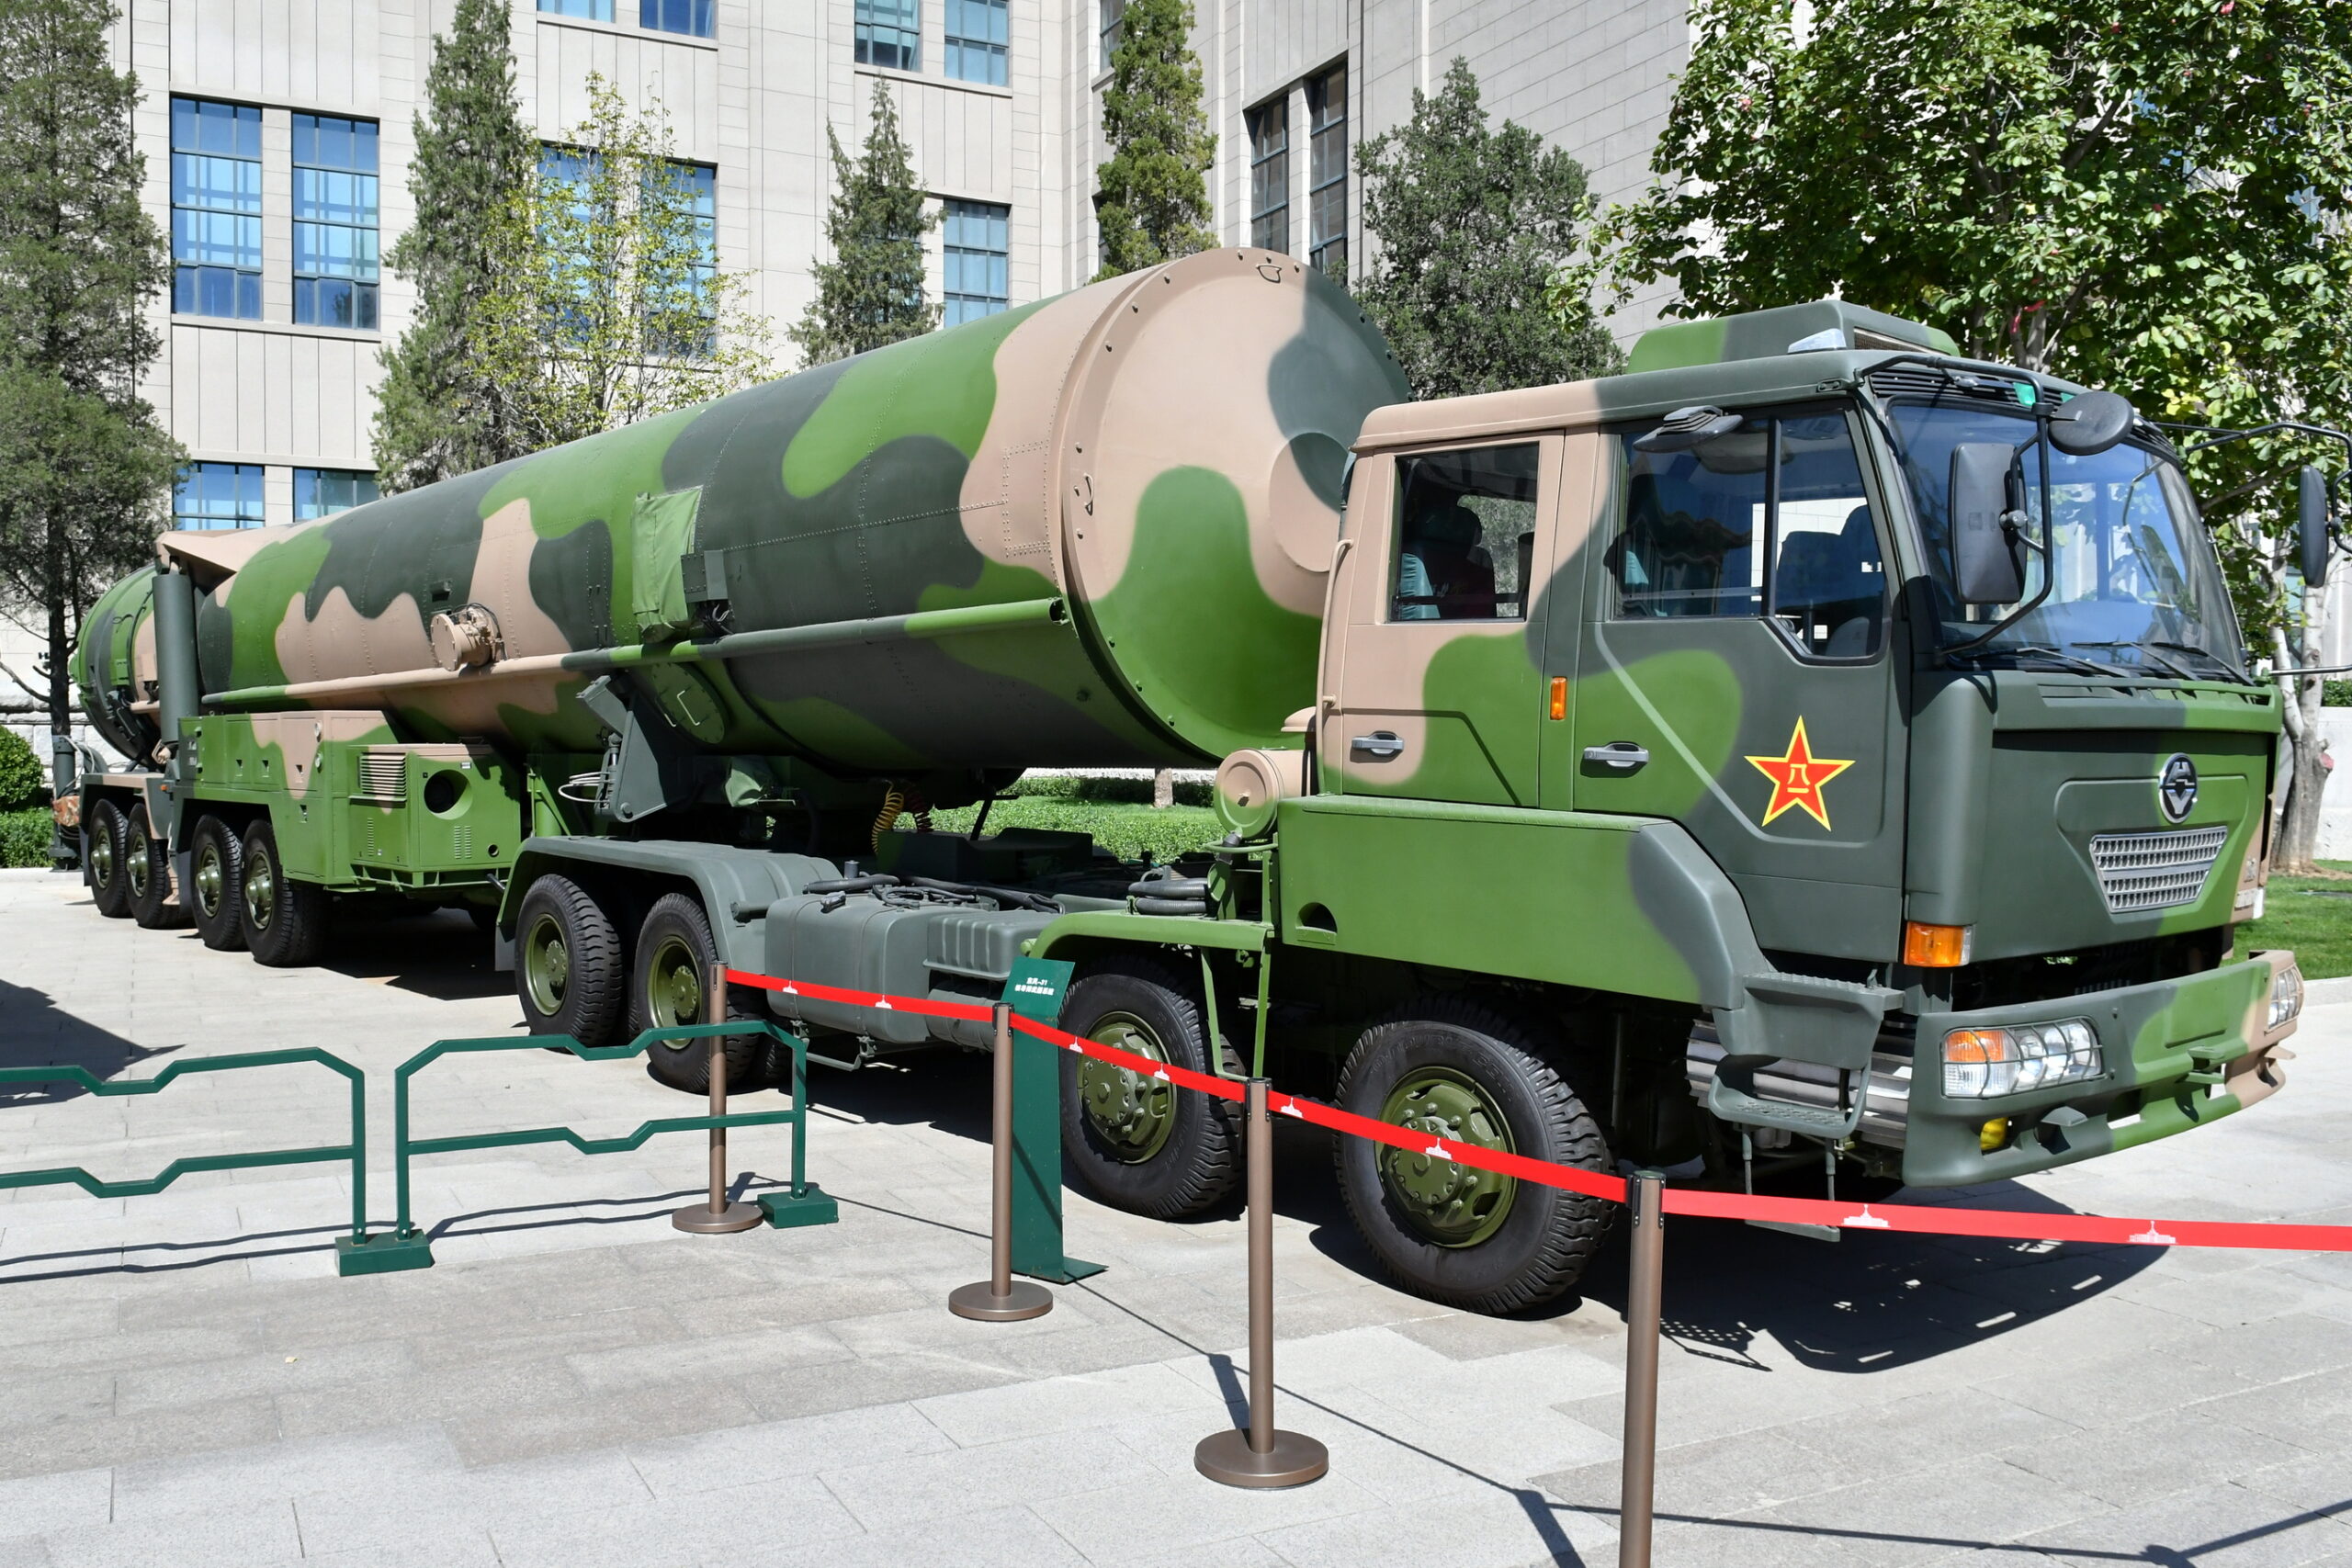 From Minimum to Limited Deterrence: China’s Nuclear build-up and future implications